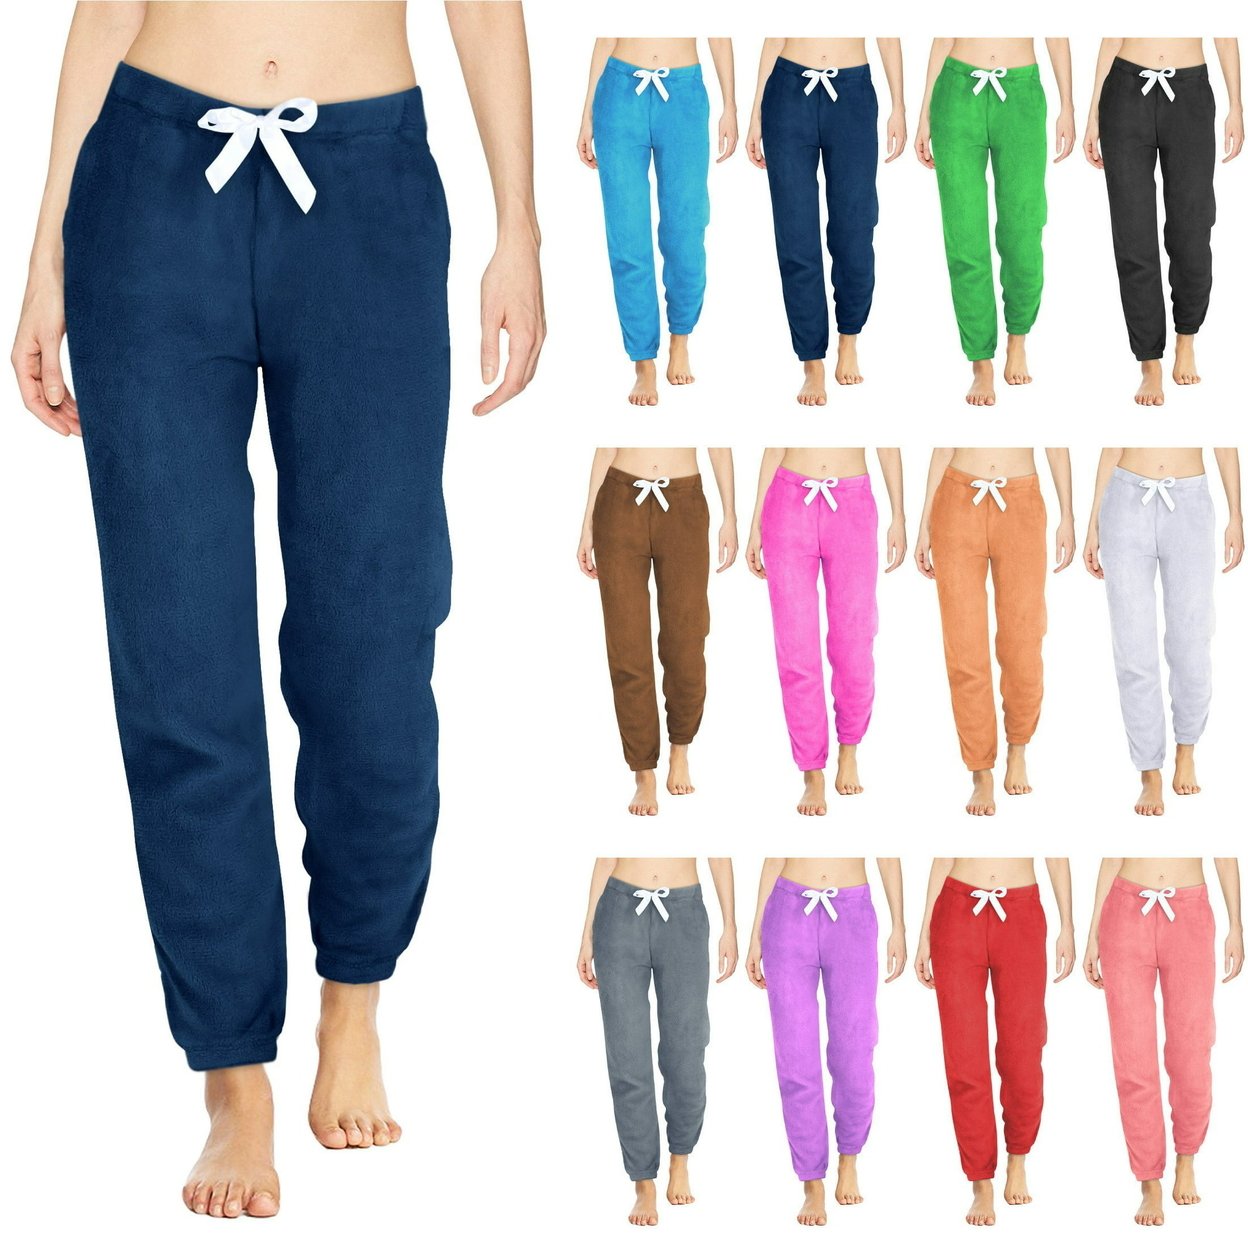 Multi-Pack: Women's Solid & Printed Ultra-Soft Comfy Stretch Micro-Fleece Pajama Lounge Pants - 1-pack, Xx-large, Animal